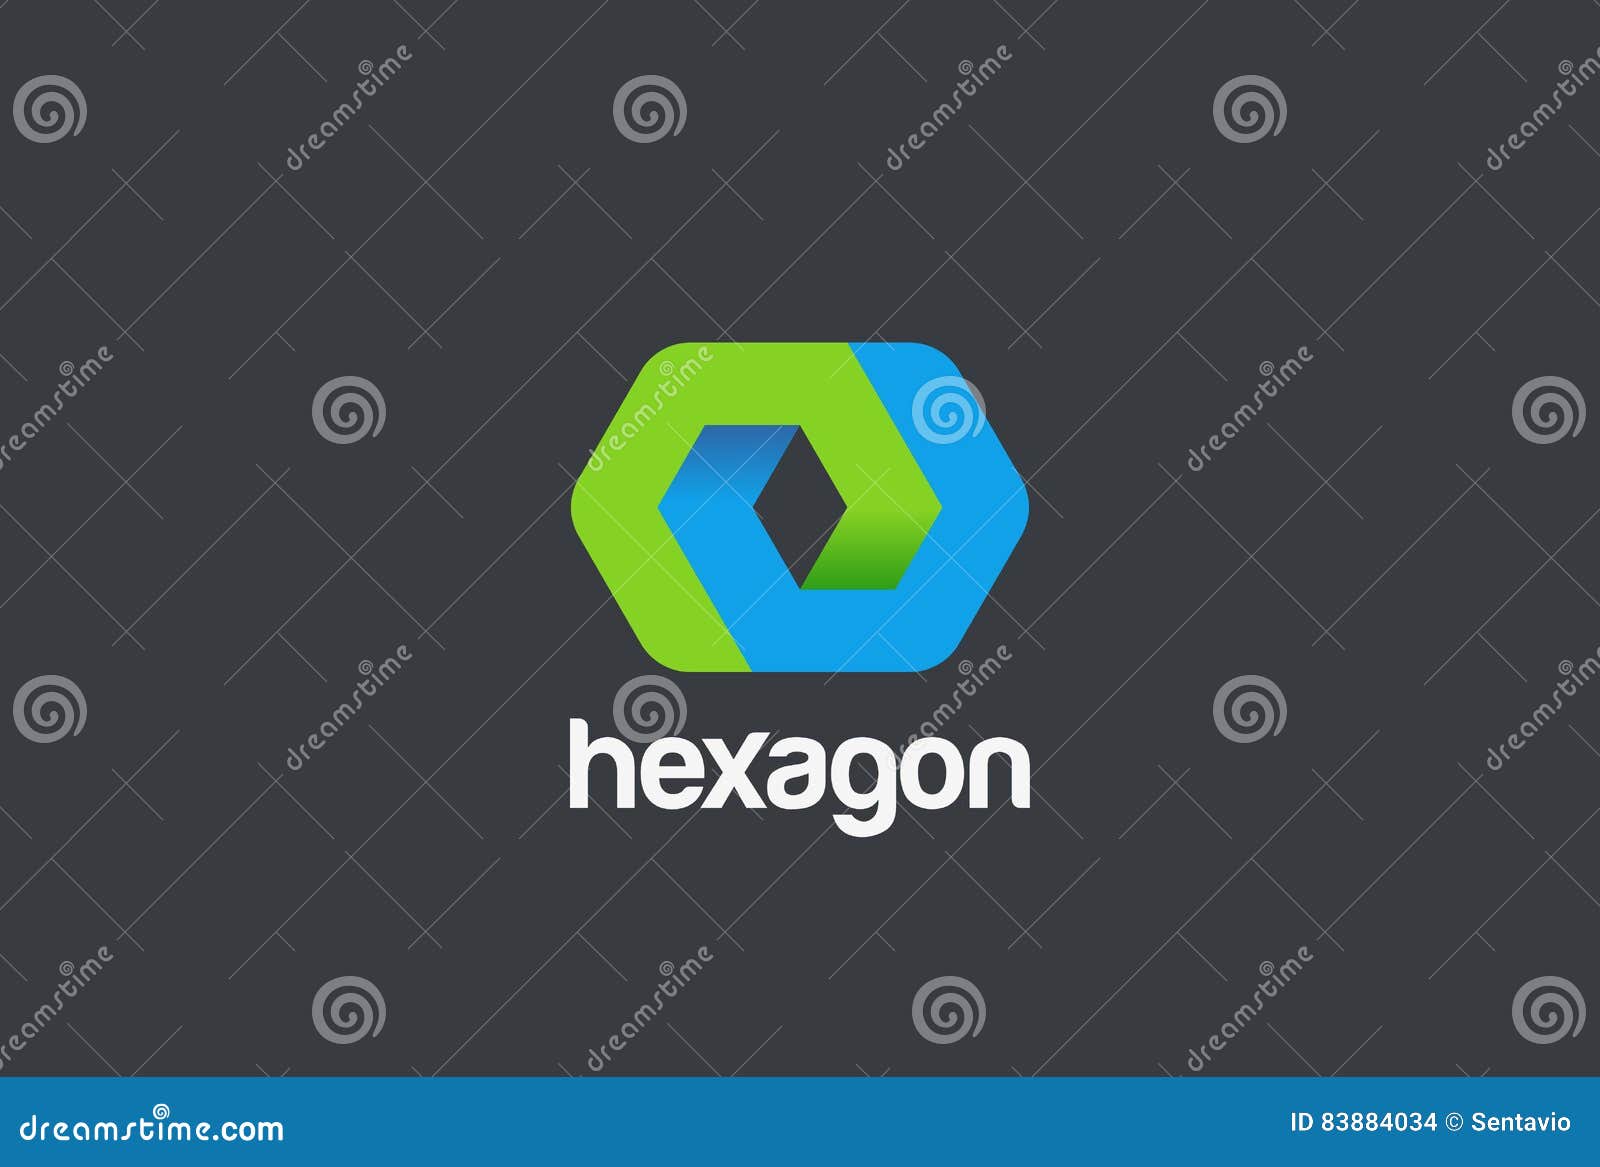 corporate business geometric impossible abstract logo  template.hexagon looped infinity  logotype concept icon.